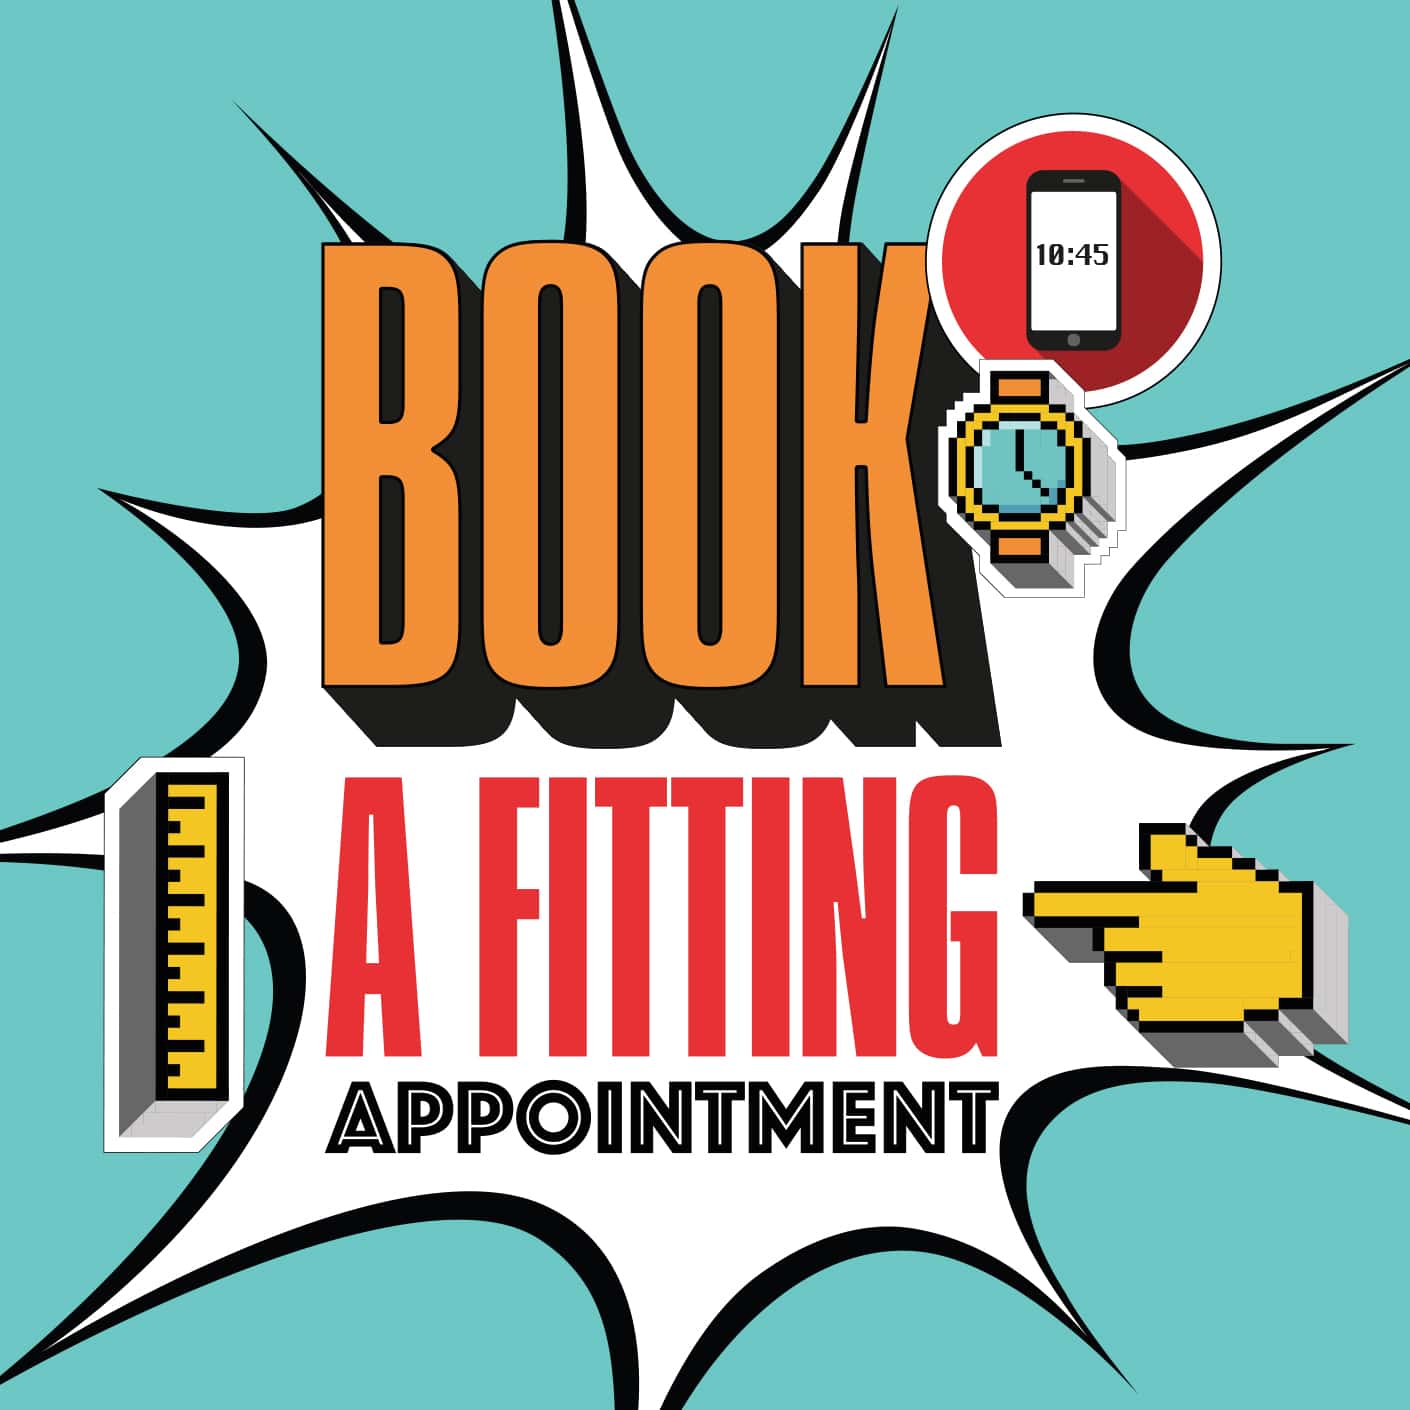 Poster with 'book a fitting appointment'.